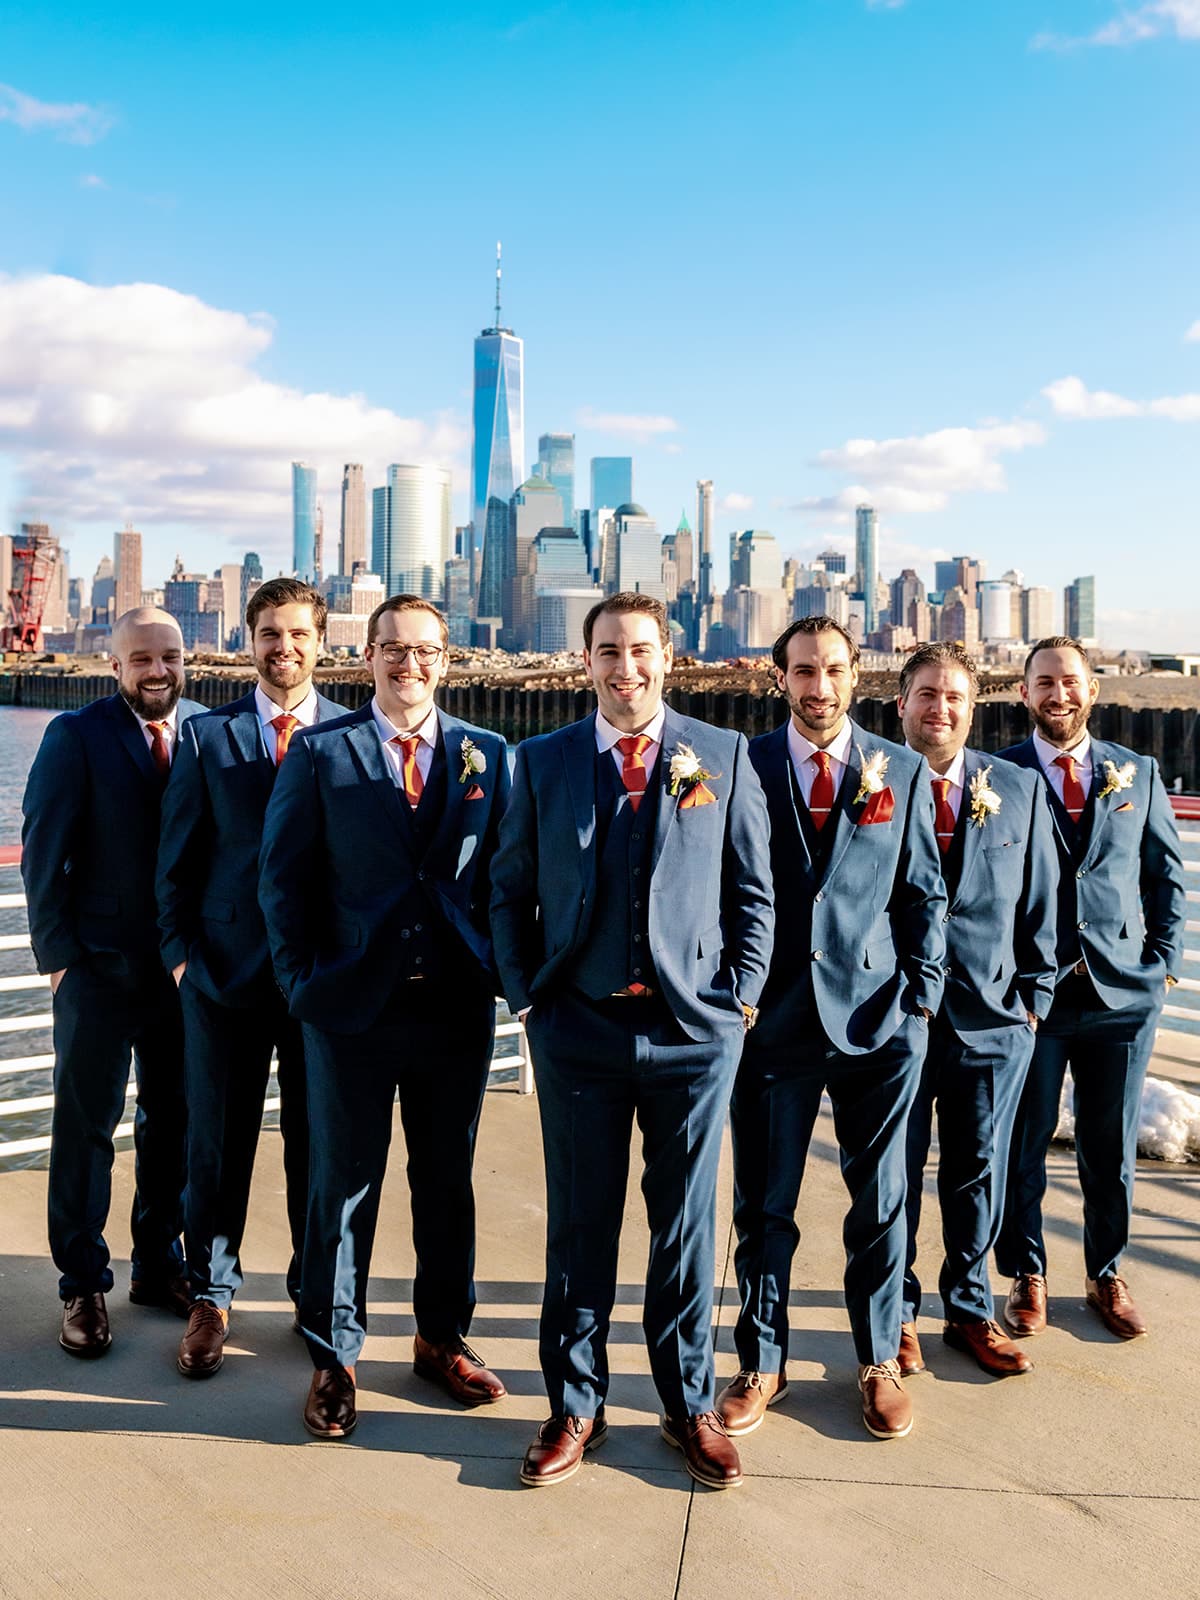 A group of men in navy wedding suits stands in a v-formation with skyscrapers in the background.